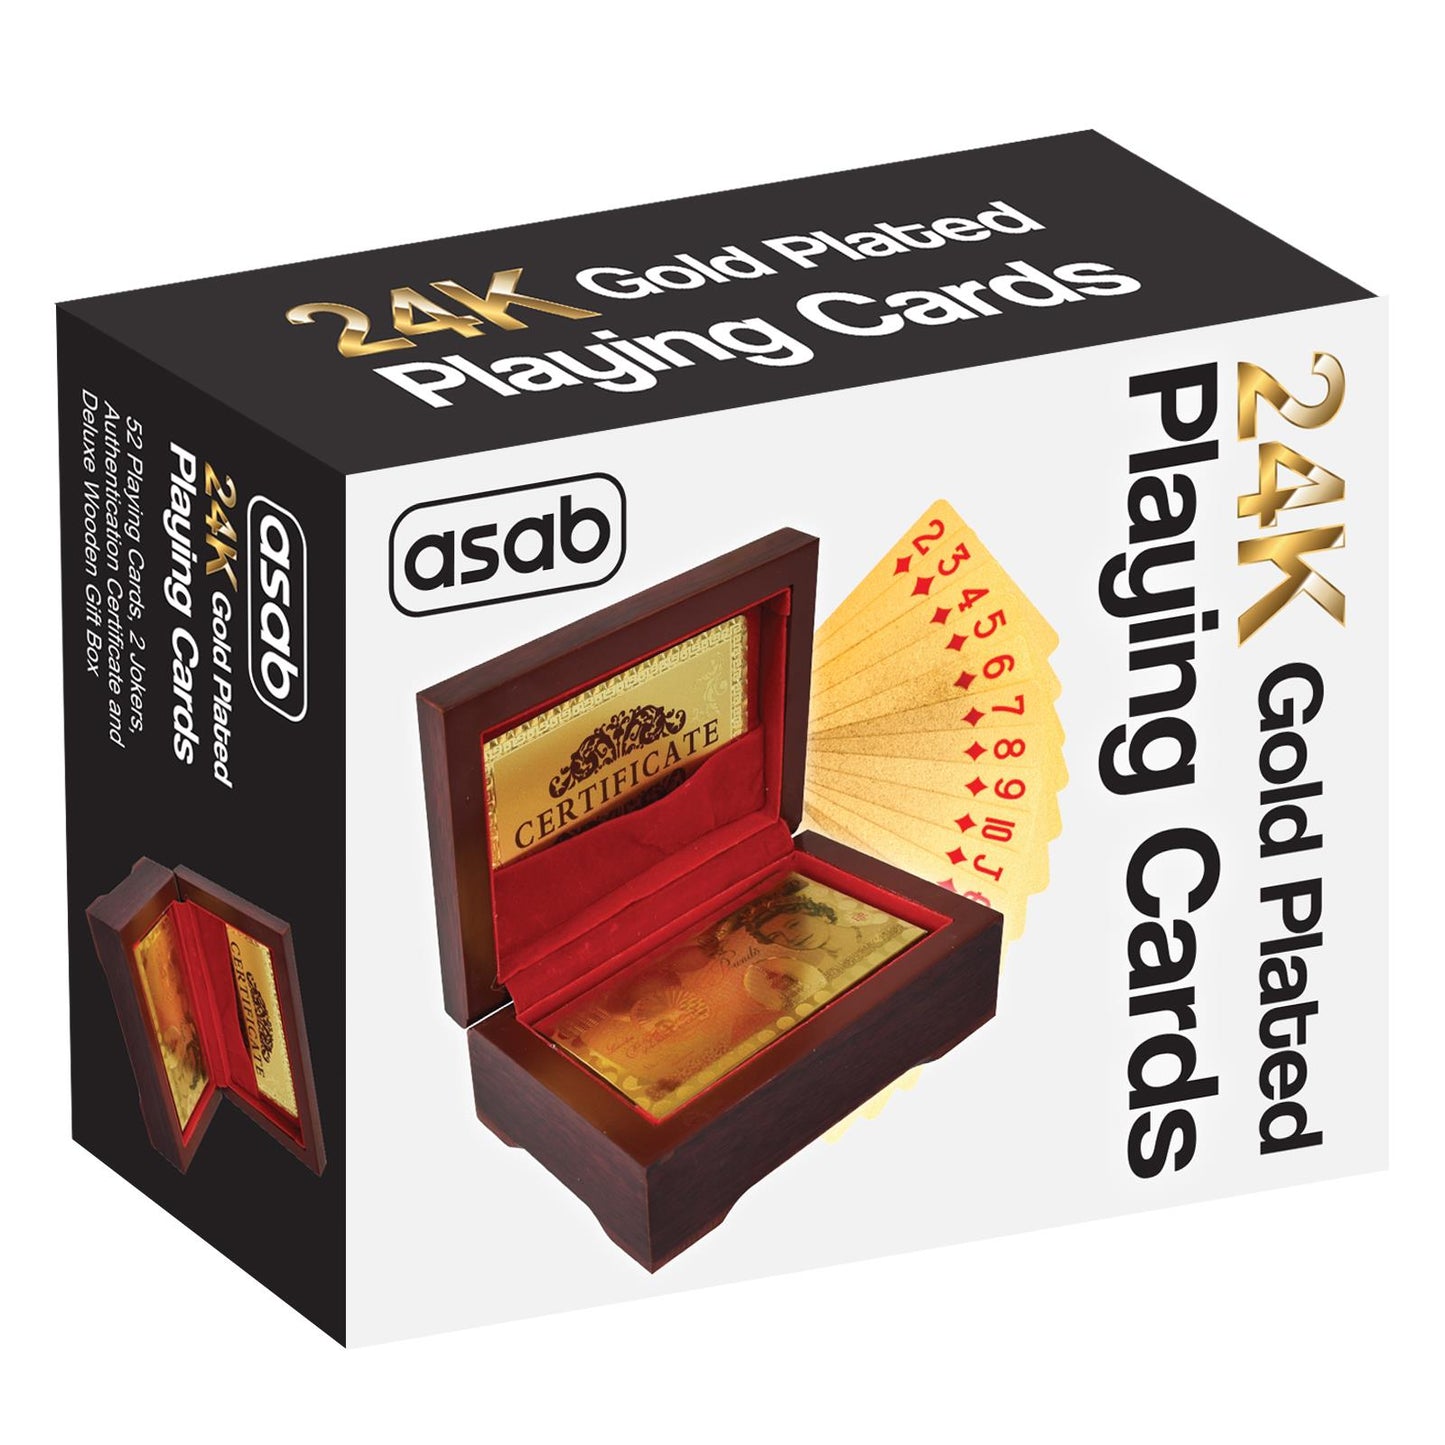 Luxury 24K Gold Plated Playing Cards